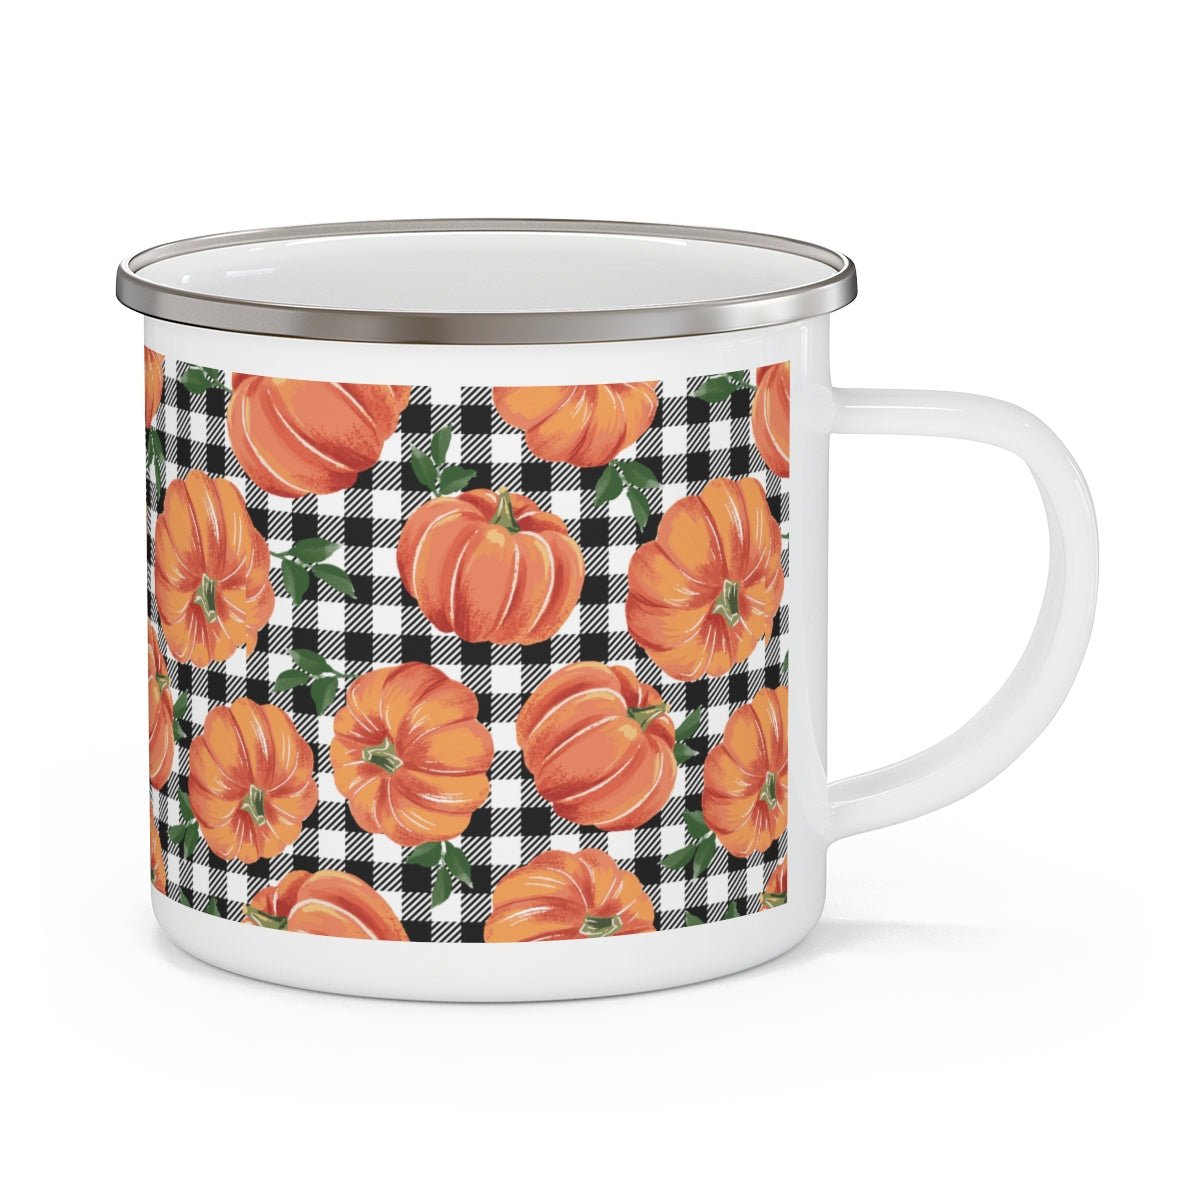 Farmhouse Pumpkins Stainless Steel Camping Mug - Puffin Lime